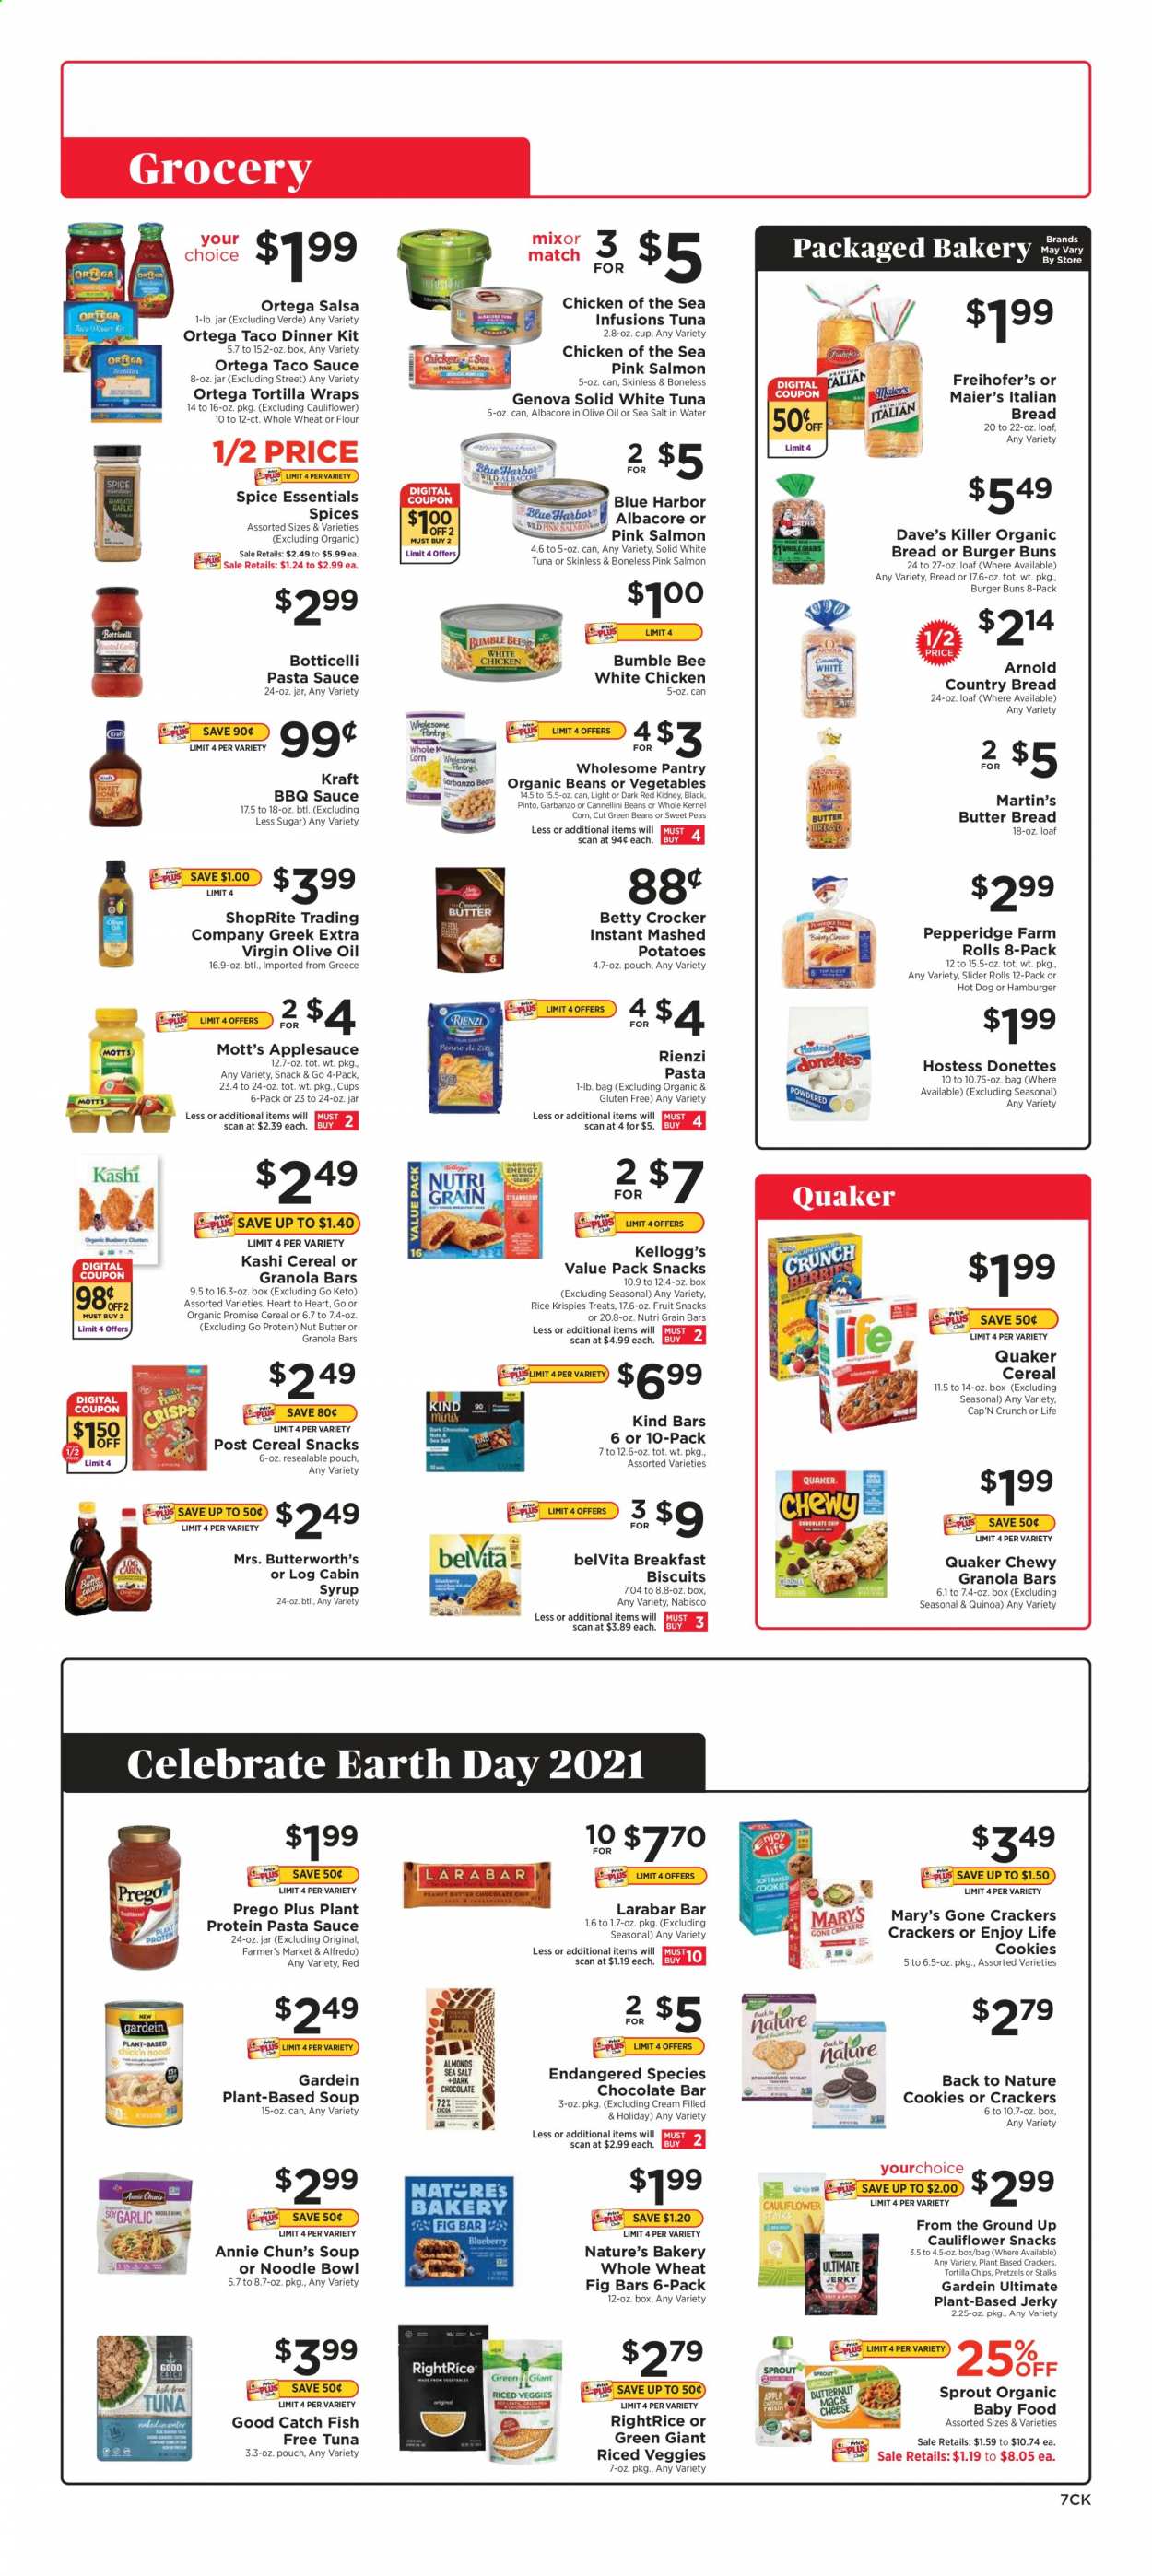 thumbnail - ShopRite Flyer - 04/18/2021 - 04/24/2021 - Sales products - bread, tortillas, pretzels, buns, burger buns, wraps, beans, cauliflower, corn, green beans, peas, Mott's, salmon, tuna, fish, mashed potatoes, hot dog, pasta sauce, soup, Bumble Bee, sauce, dinner kit, Quaker, noodles, Kraft®, jerky, cheese, cookies, chocolate, crackers, Kellogg's, biscuit, dark chocolate, fruit snack, chips, plant protein, cannellini beans, Chicken of the Sea, cereals, granola bar, Rice Krispies, Cap'n Crunch, belVita, Nutri-Grain, quinoa, penne, spice, BBQ sauce, taco sauce, salsa, extra virgin olive oil, apple sauce, syrup, nut butter, cup, bowl, butternut squash. Page 7.